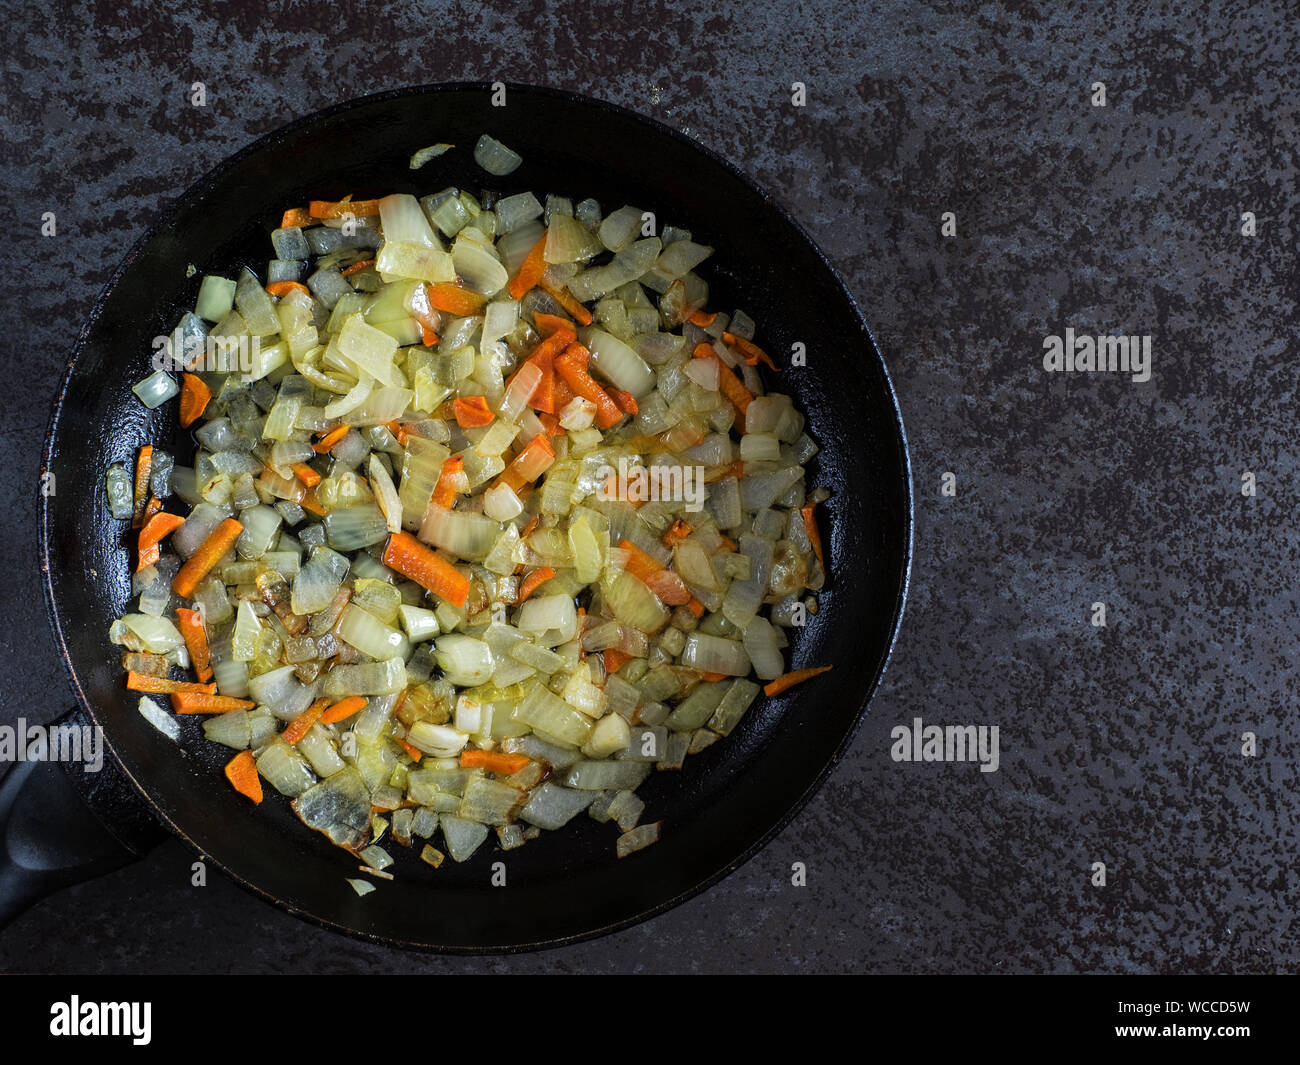 Directly Above Shot Of Cooked Onions And Carrots In Pan On Table Stock Photo